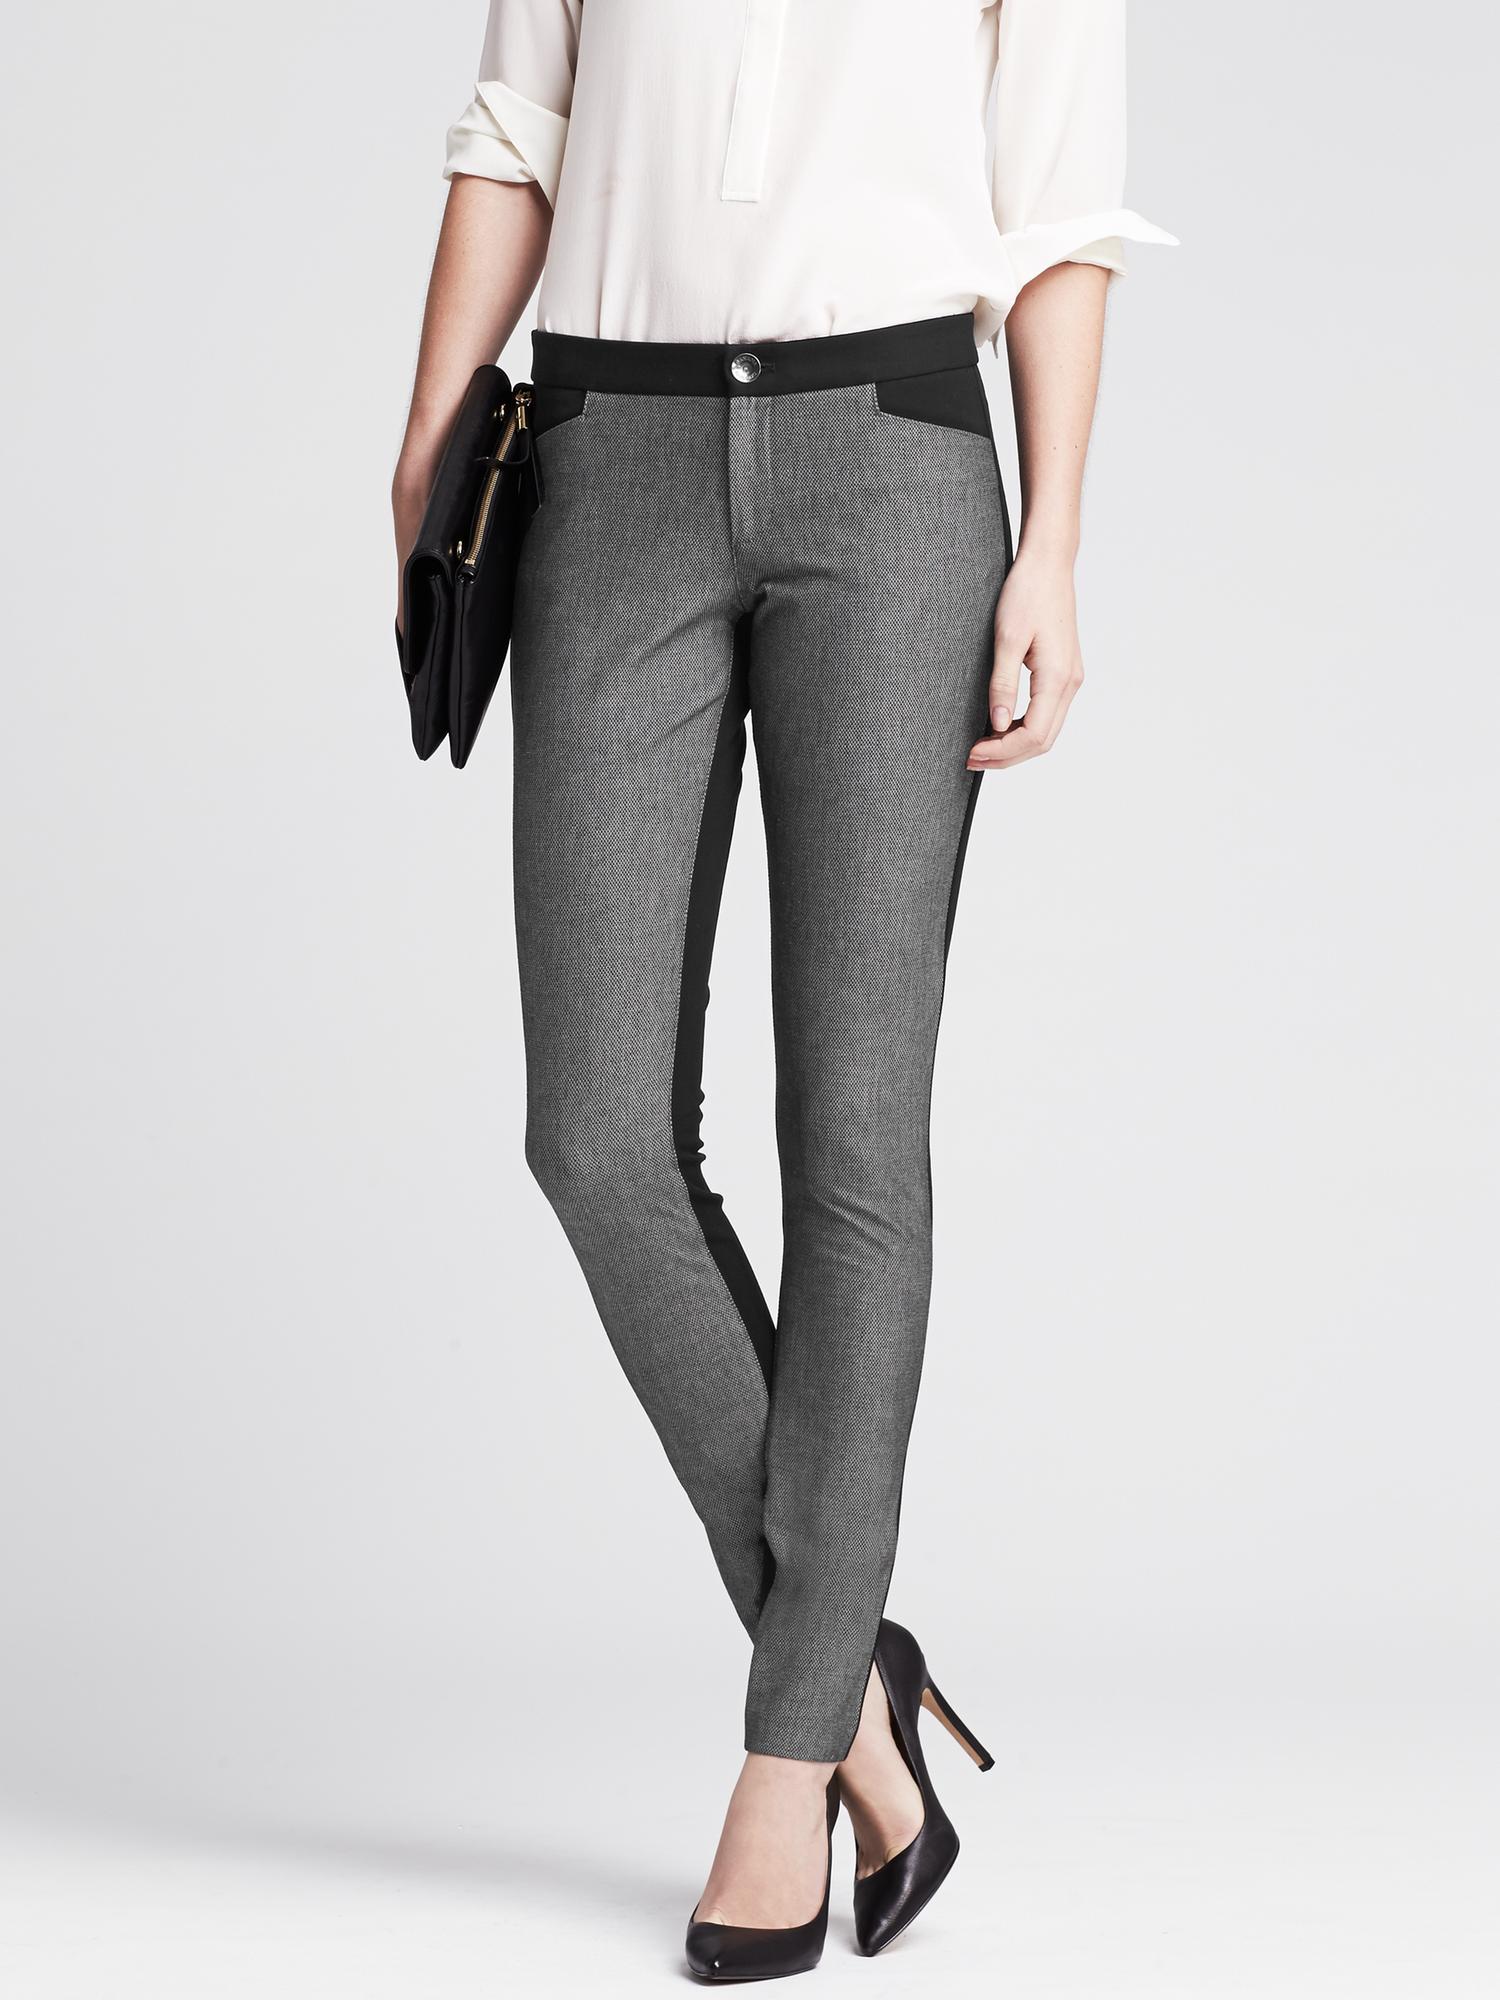 Sloan-Fit Charcoal Colorblock Skinny Ankle Pant